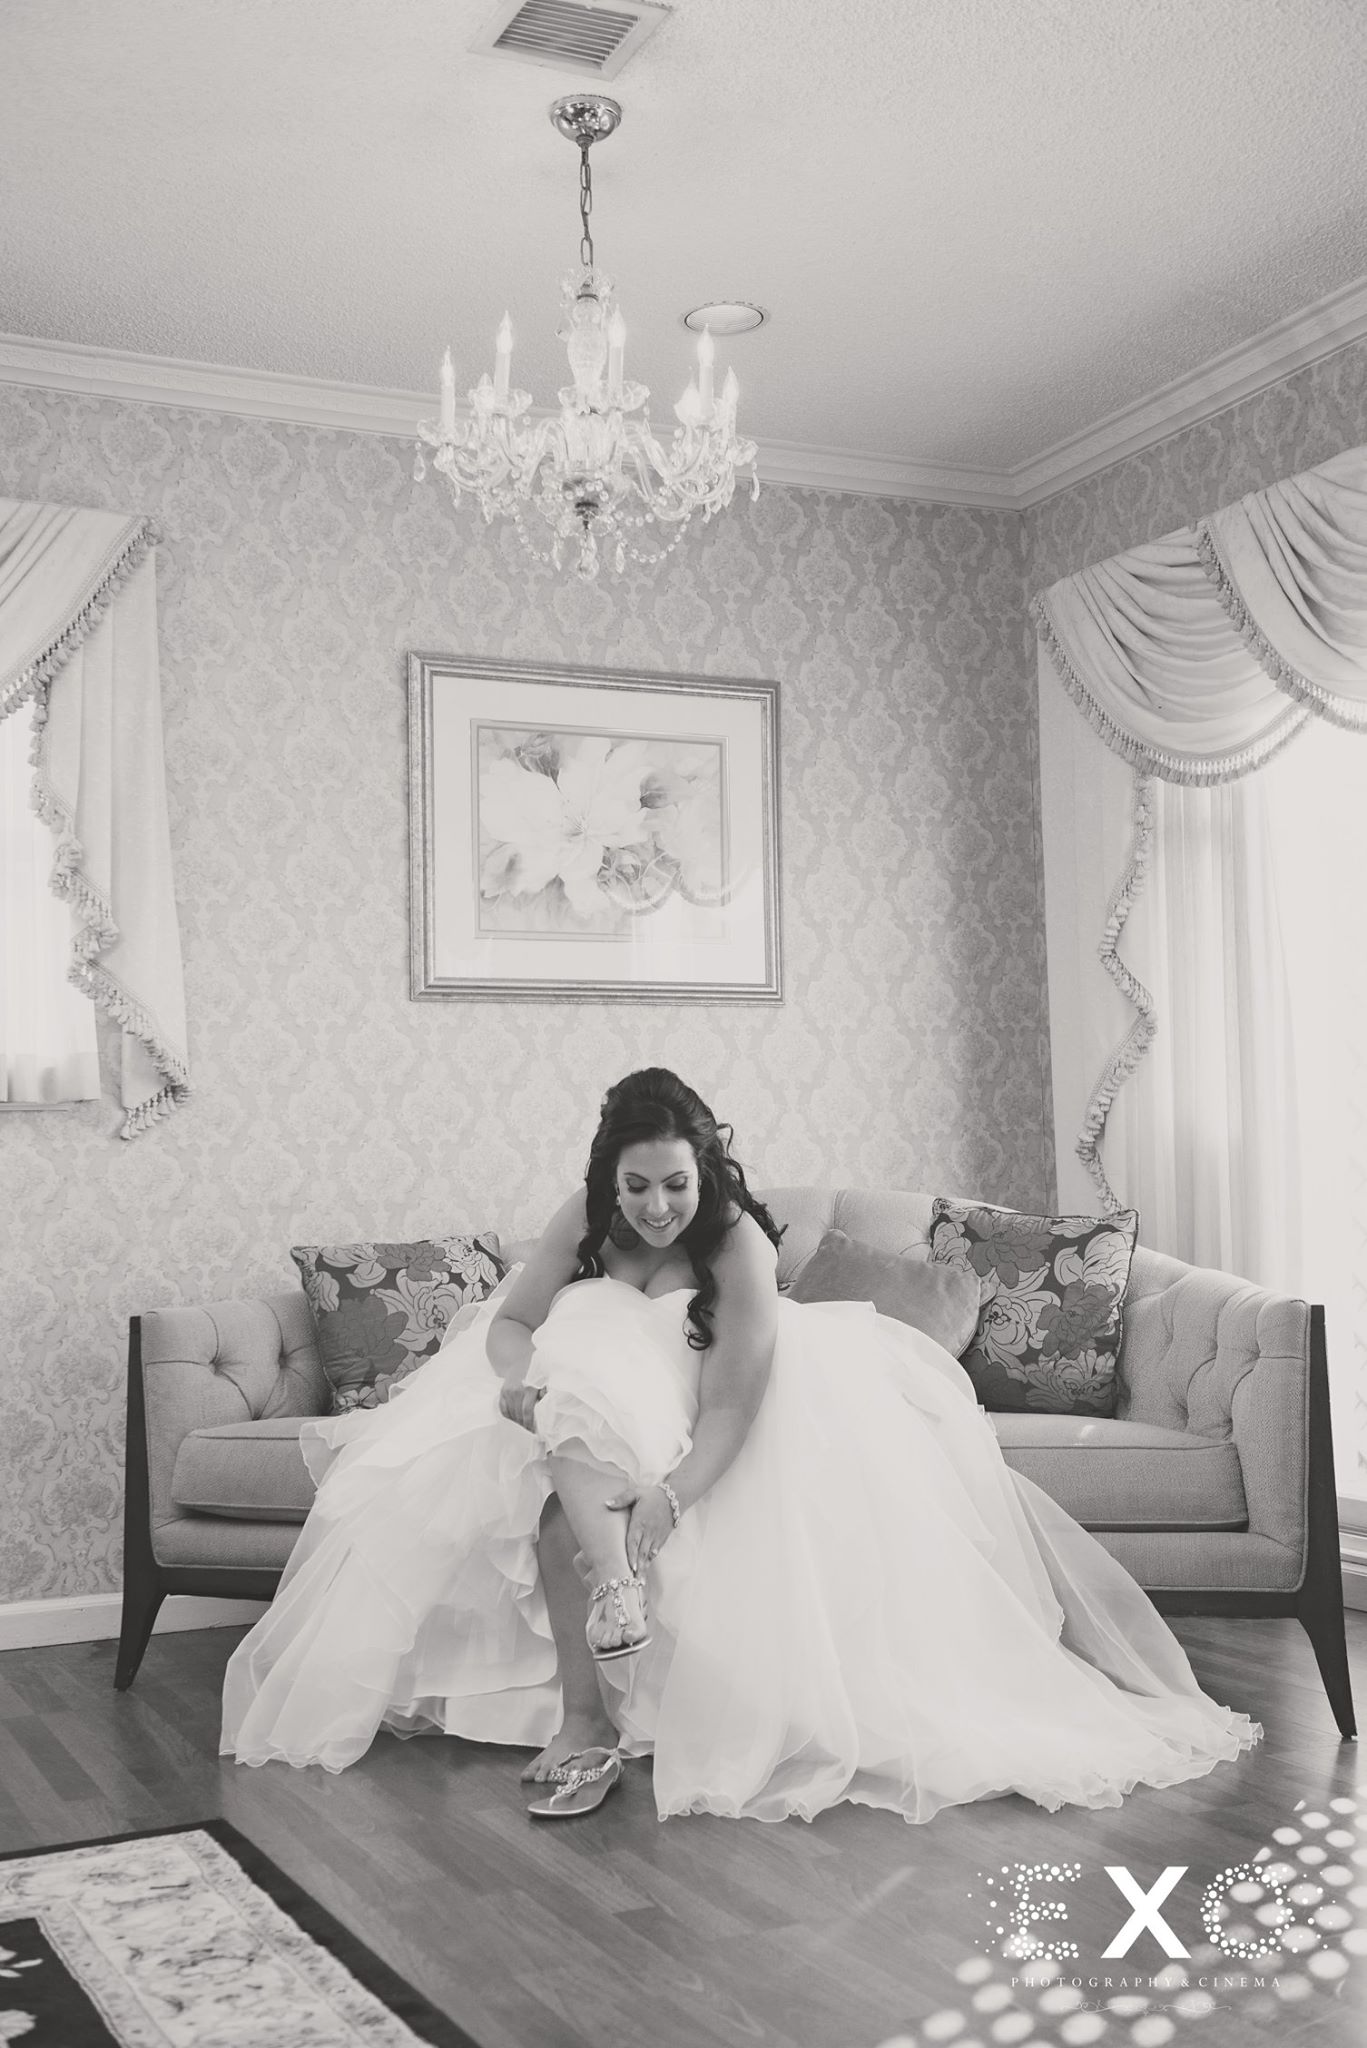 Black and white image of bride putting on Nina shoes for wedding ceremony